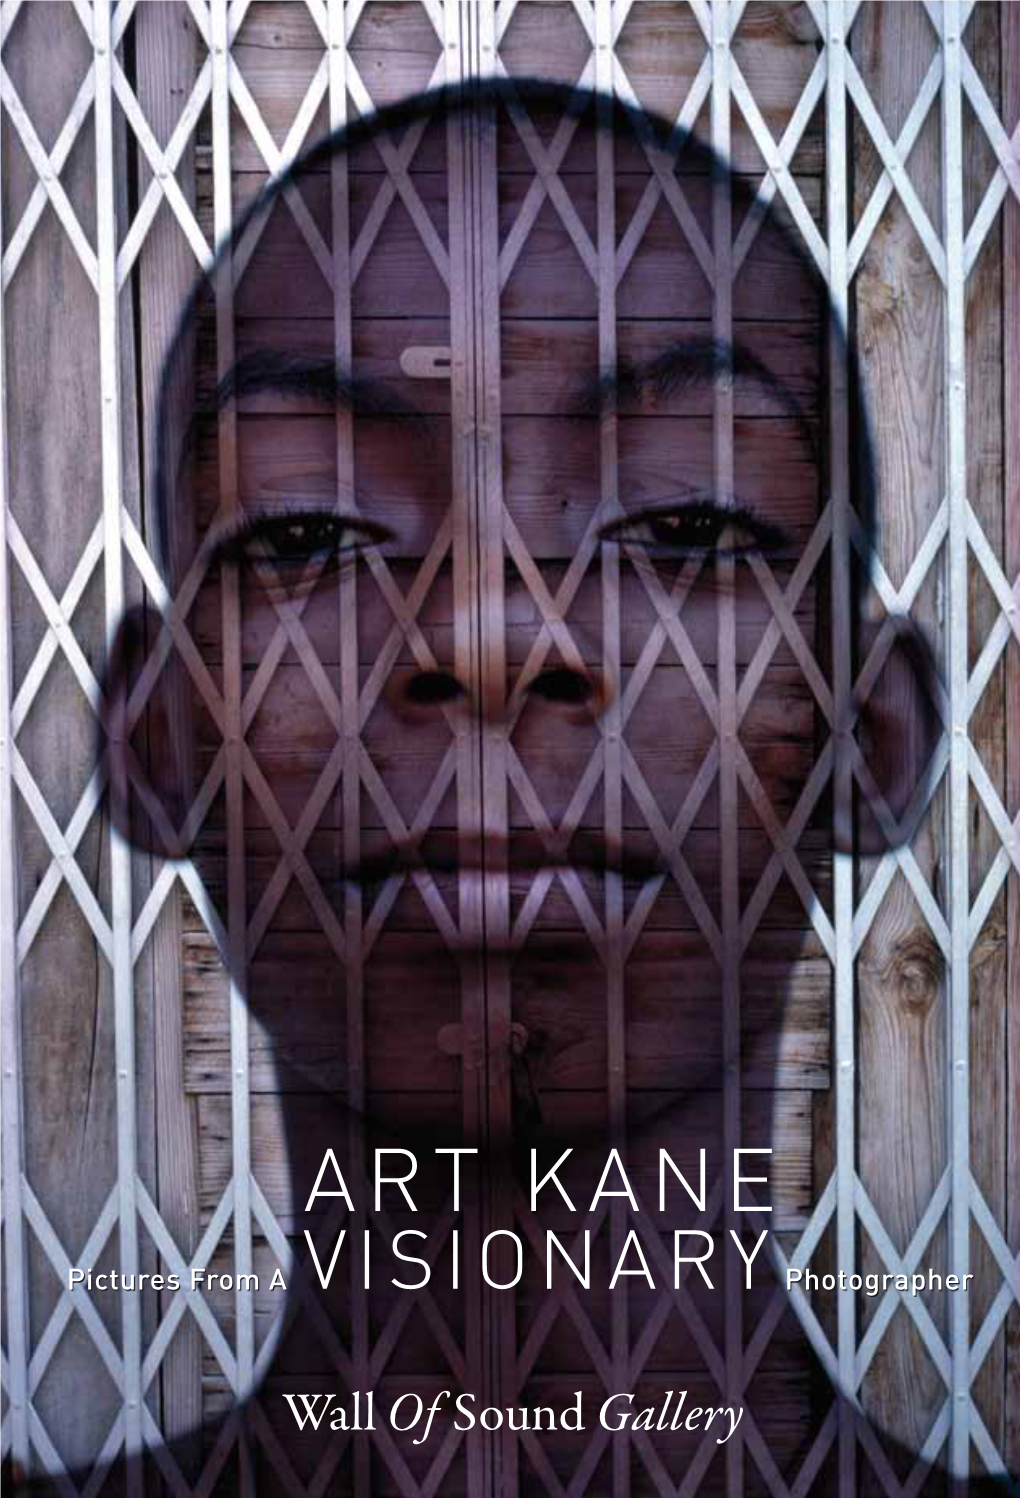 ART KANE Pictures from a Visionary Photographer